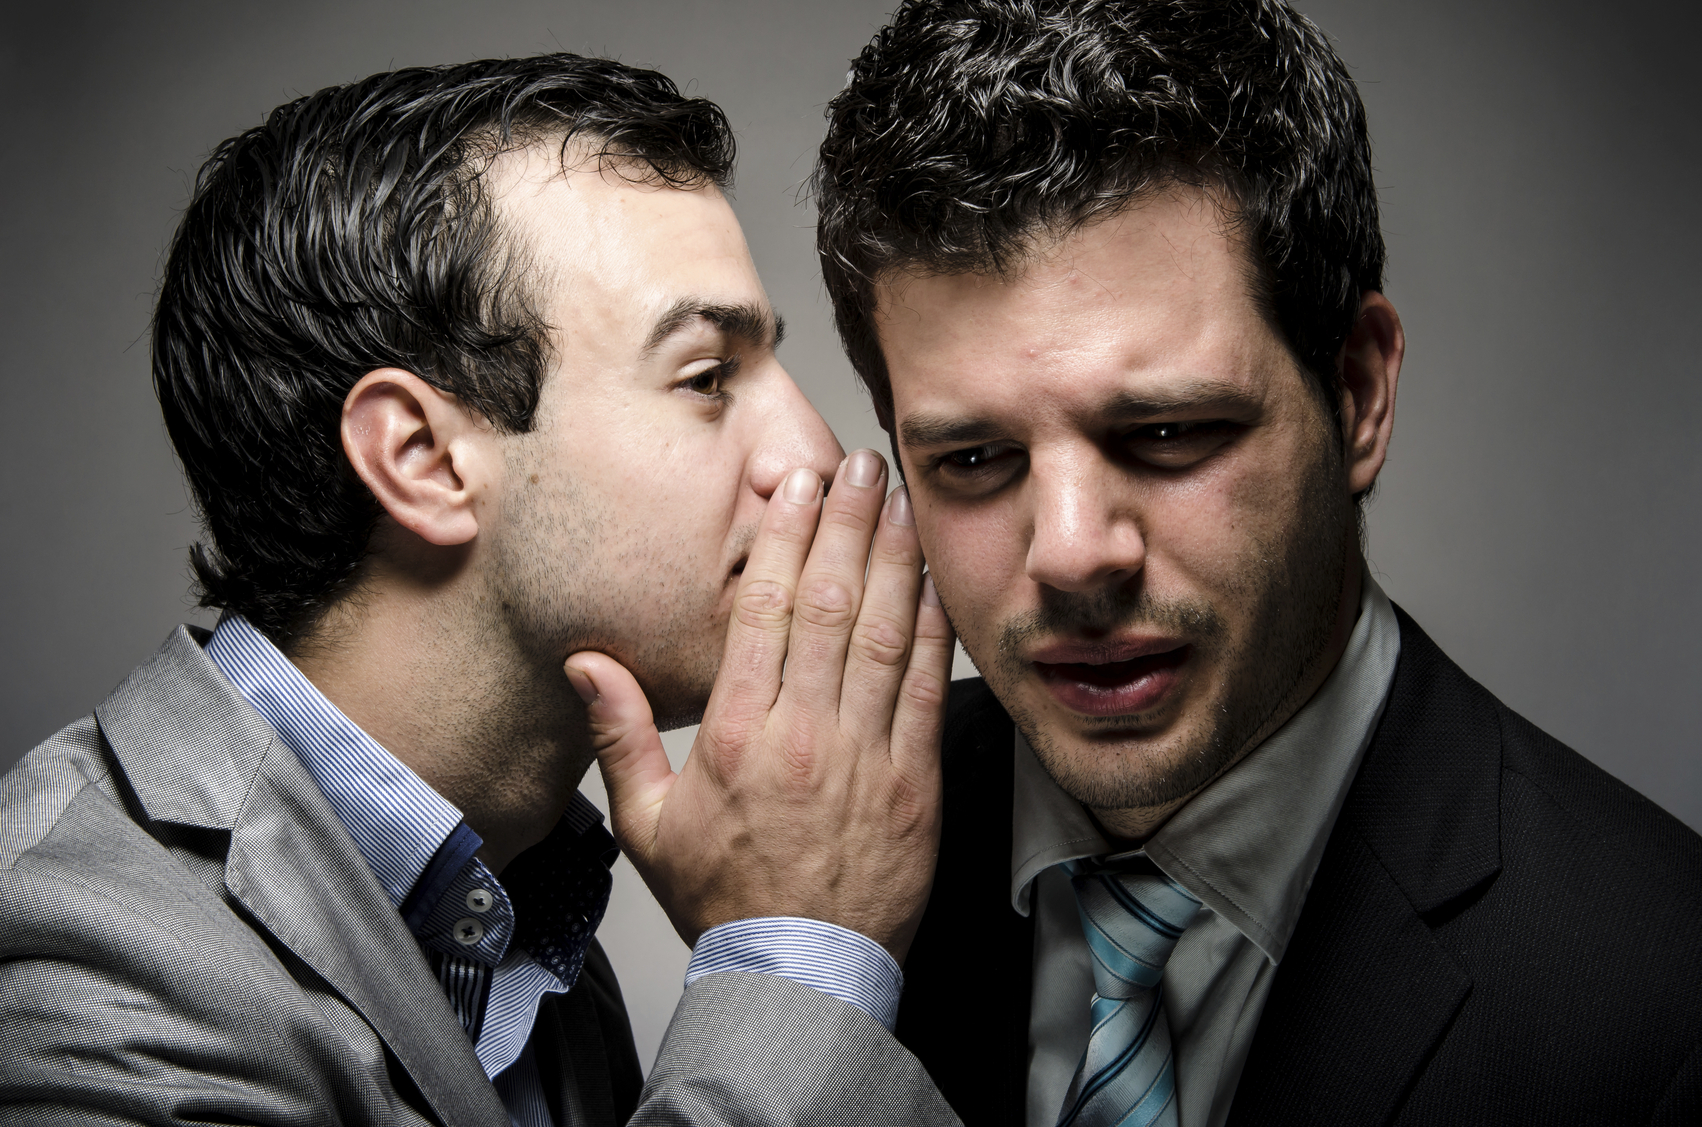 How To Avoid Gossip & Its Damaging Effects On Relationships